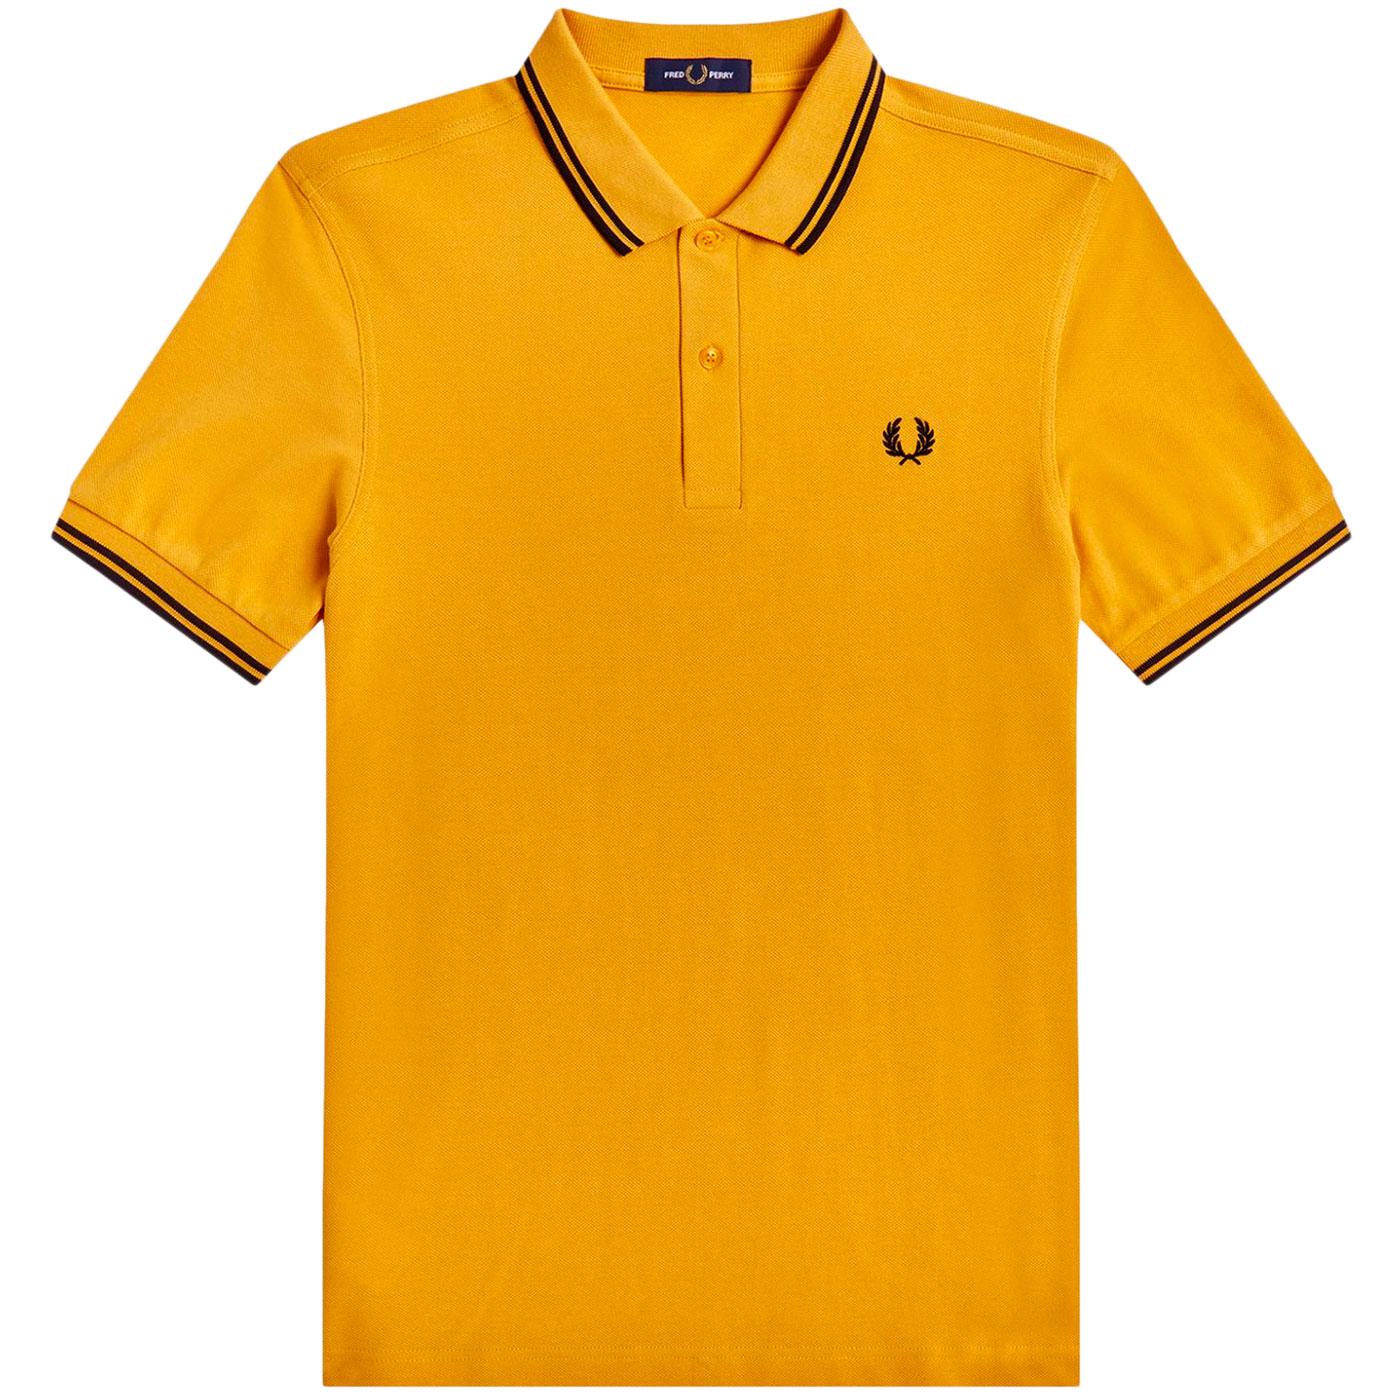 FRED PERRY M3600 Twin Tipped Mod Polo Shirt (G/B)